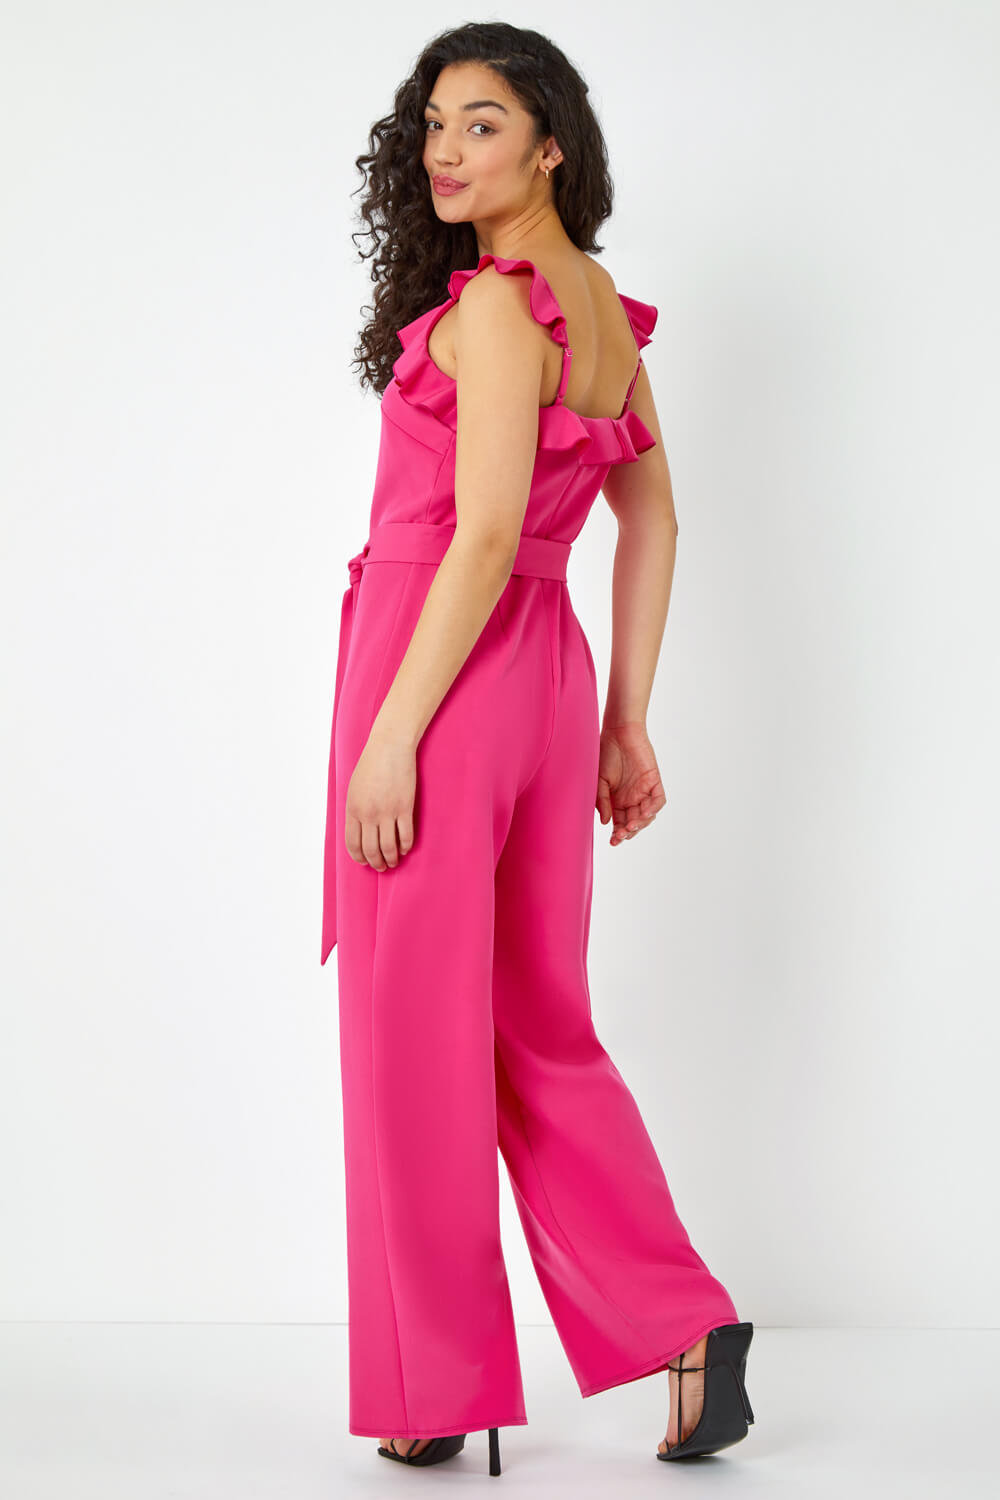 PINK Frill Detail Wide Leg Jumpsuit, Image 3 of 5